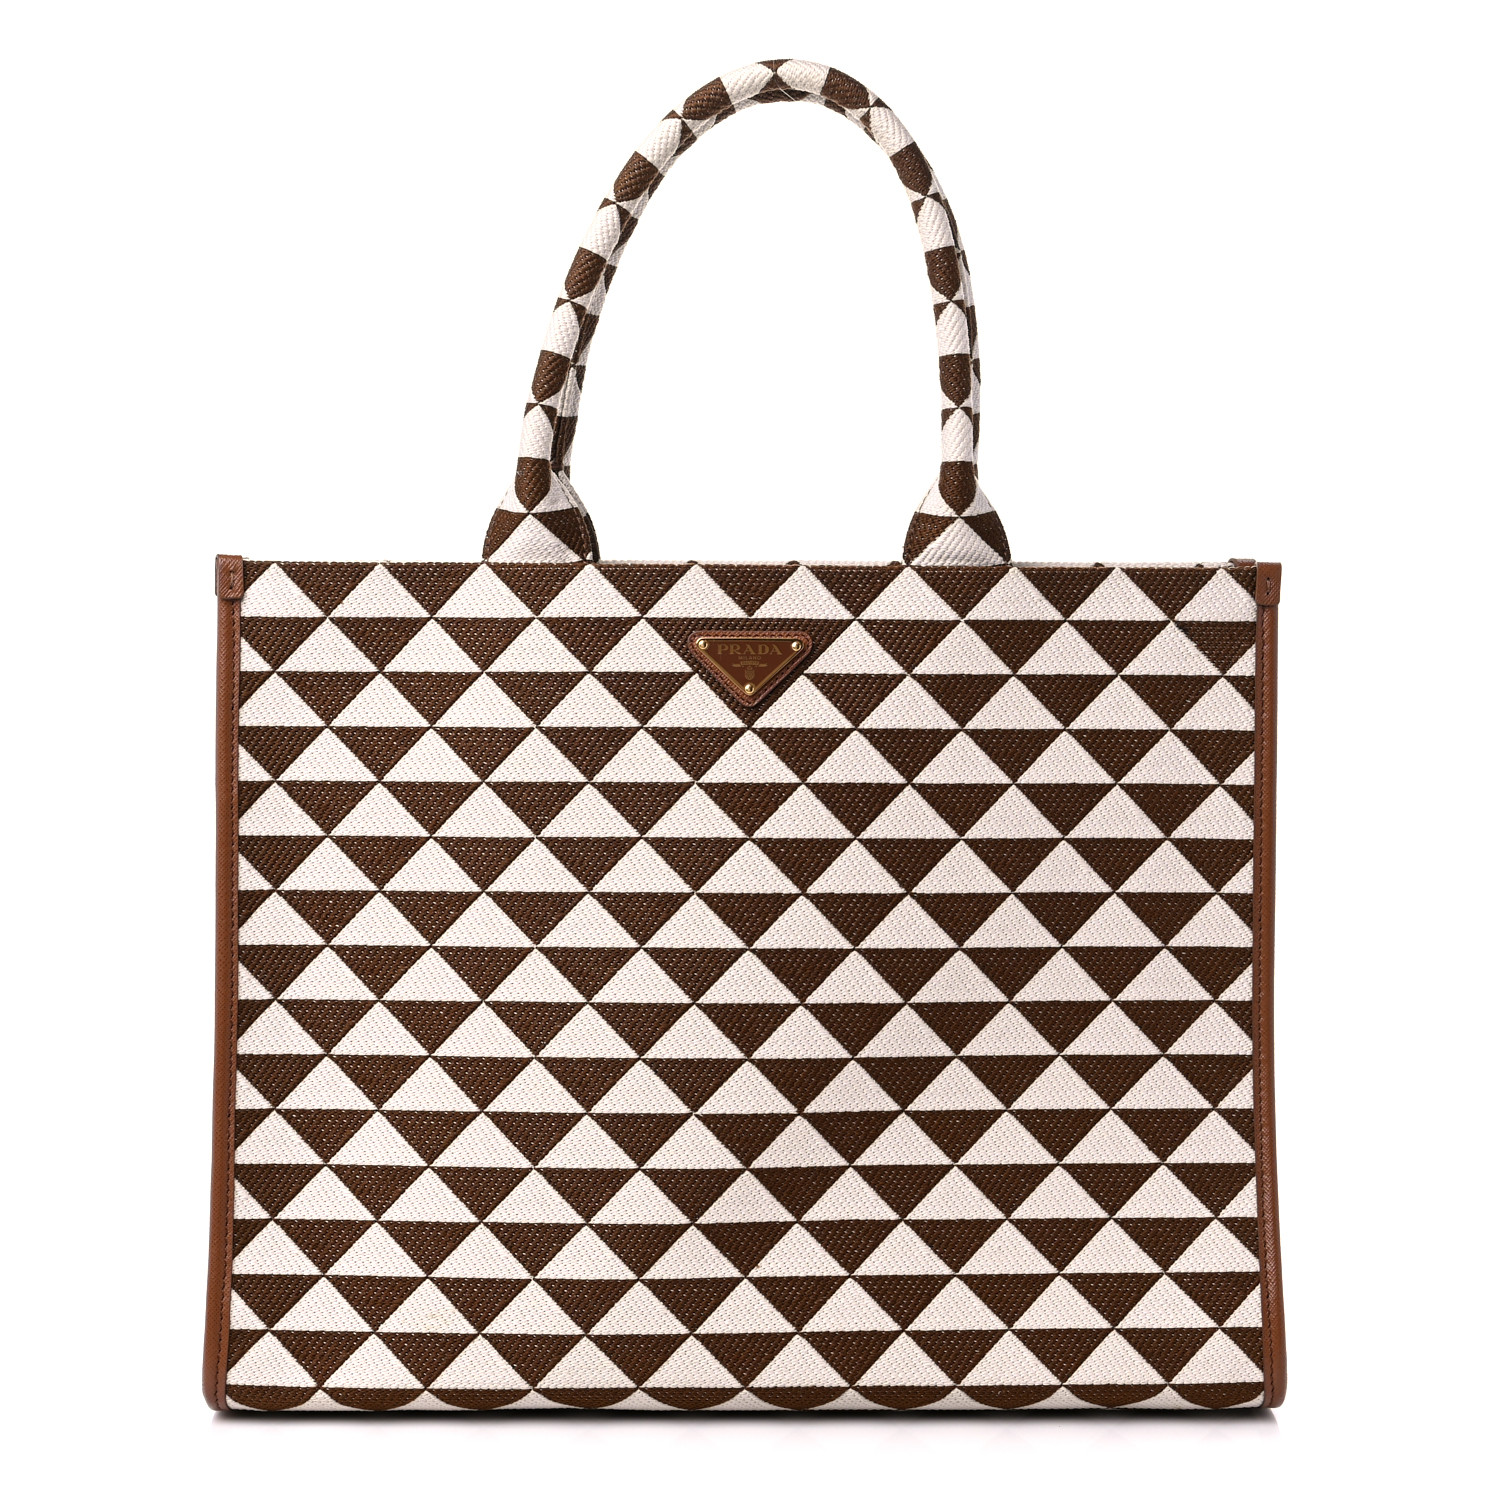 front view image of a PRADA Jacquard Large Symbole Tote in the colors Tobacco and Chalk White by FASHIONPHILE